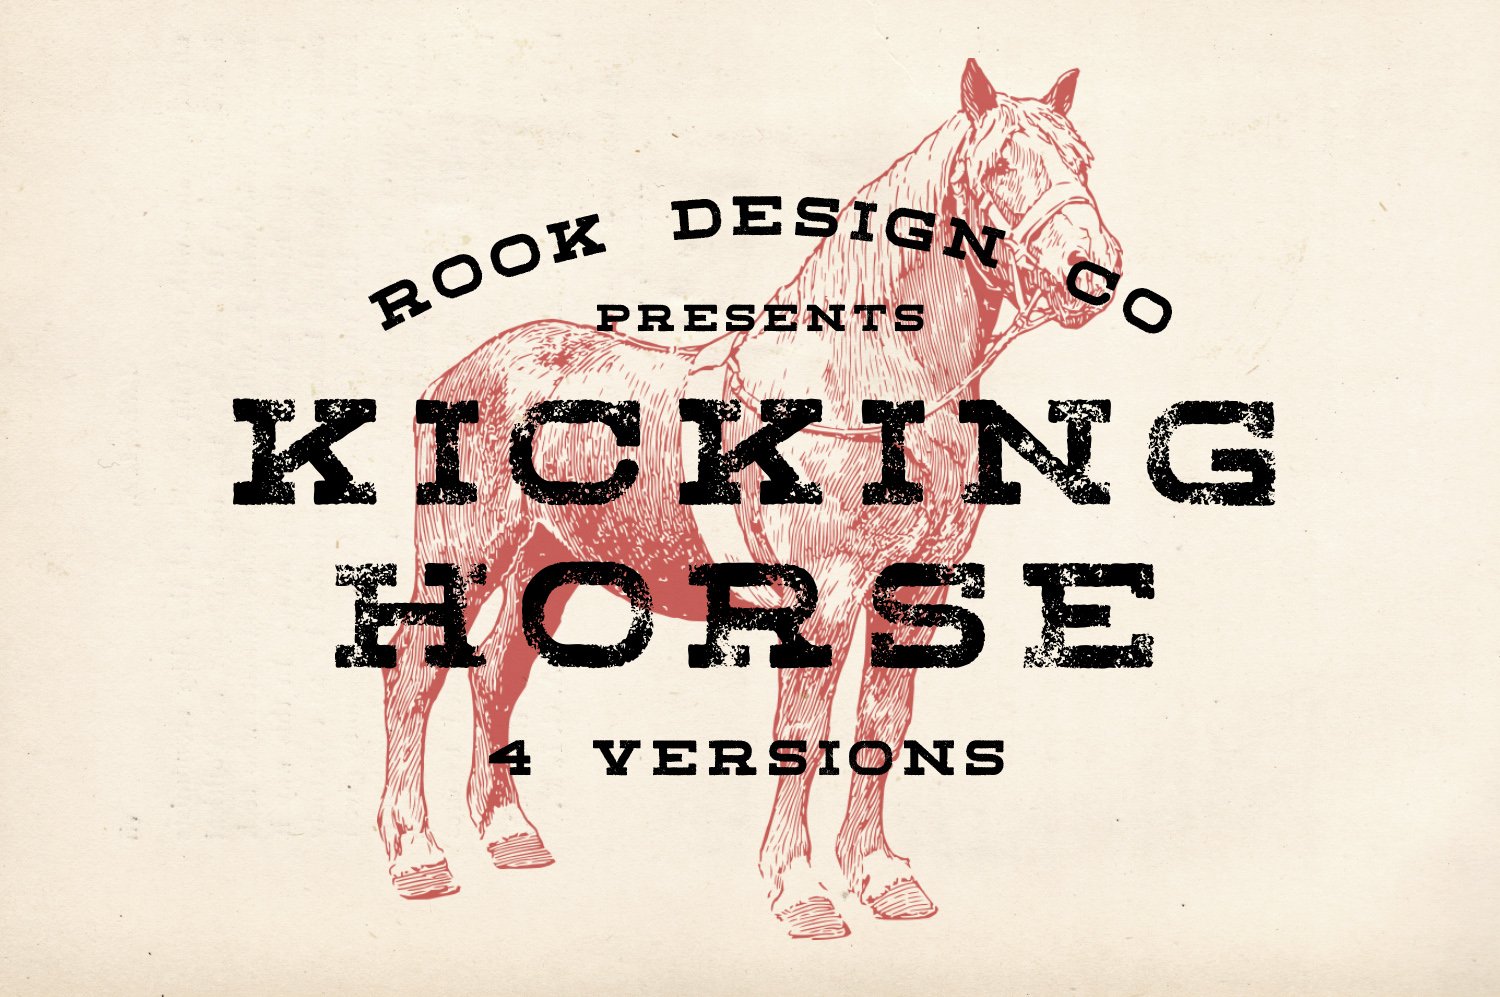 Kicking Horse - 4 Font Family cover image.